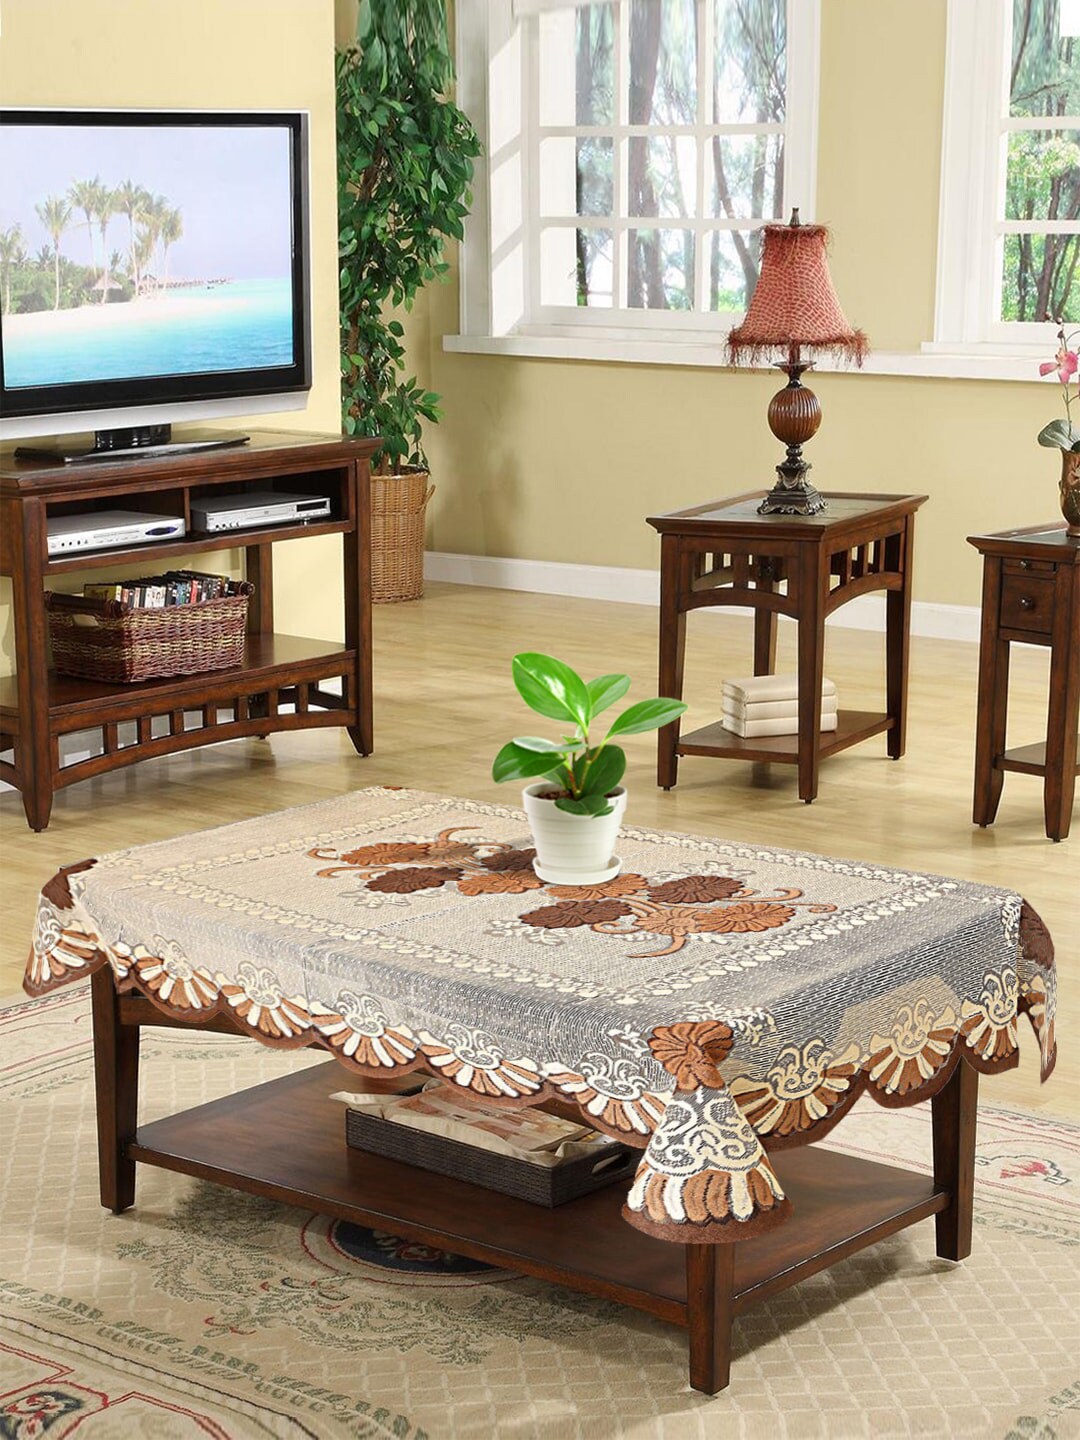 Kuber Industries Cream & Brown Printed 4-Seater Rectangular Table Cover Price in India